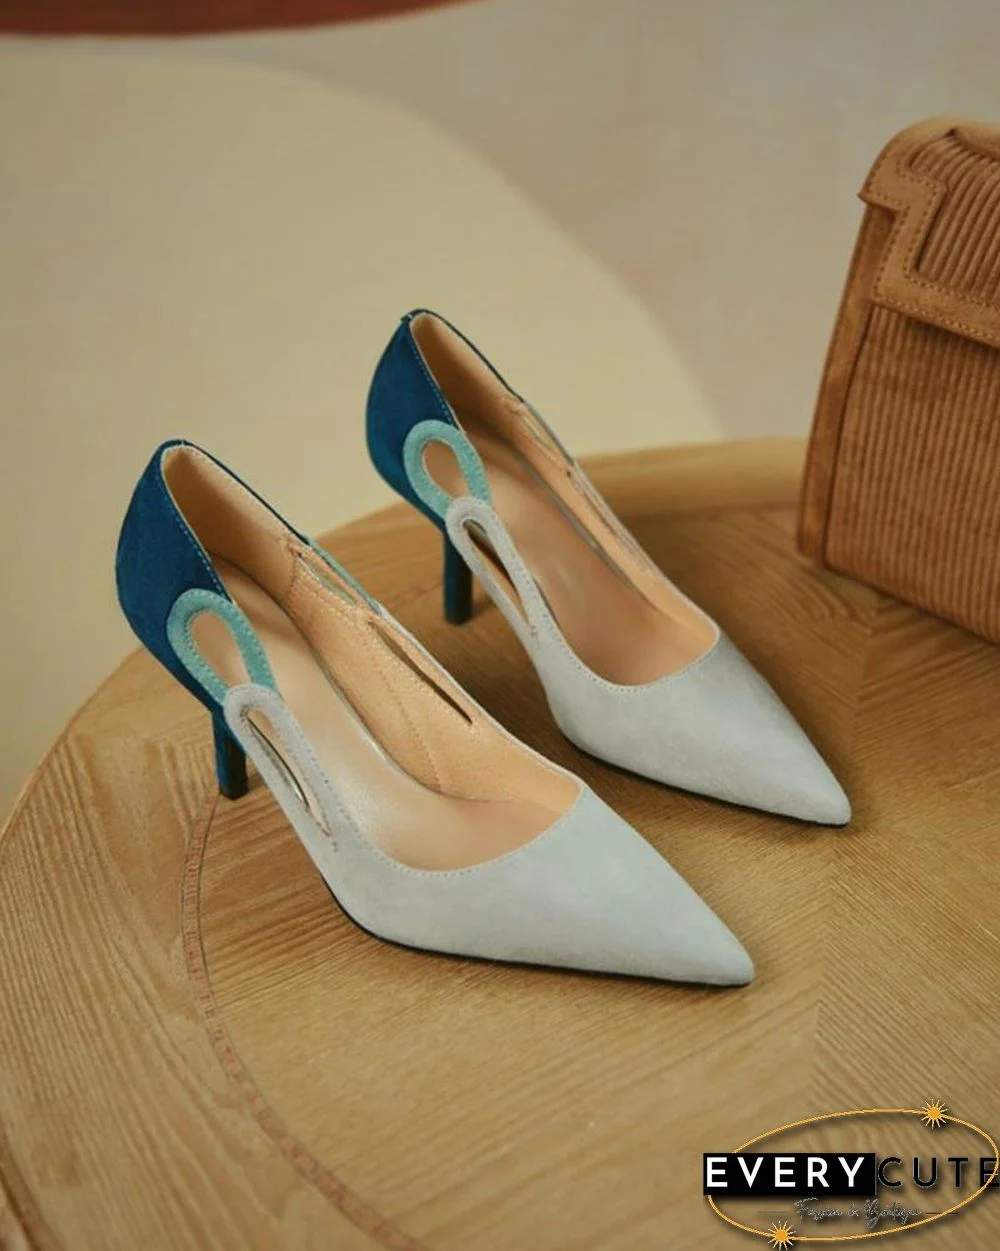 Colorblock Cut-out Suede Leather High Heel Sandals